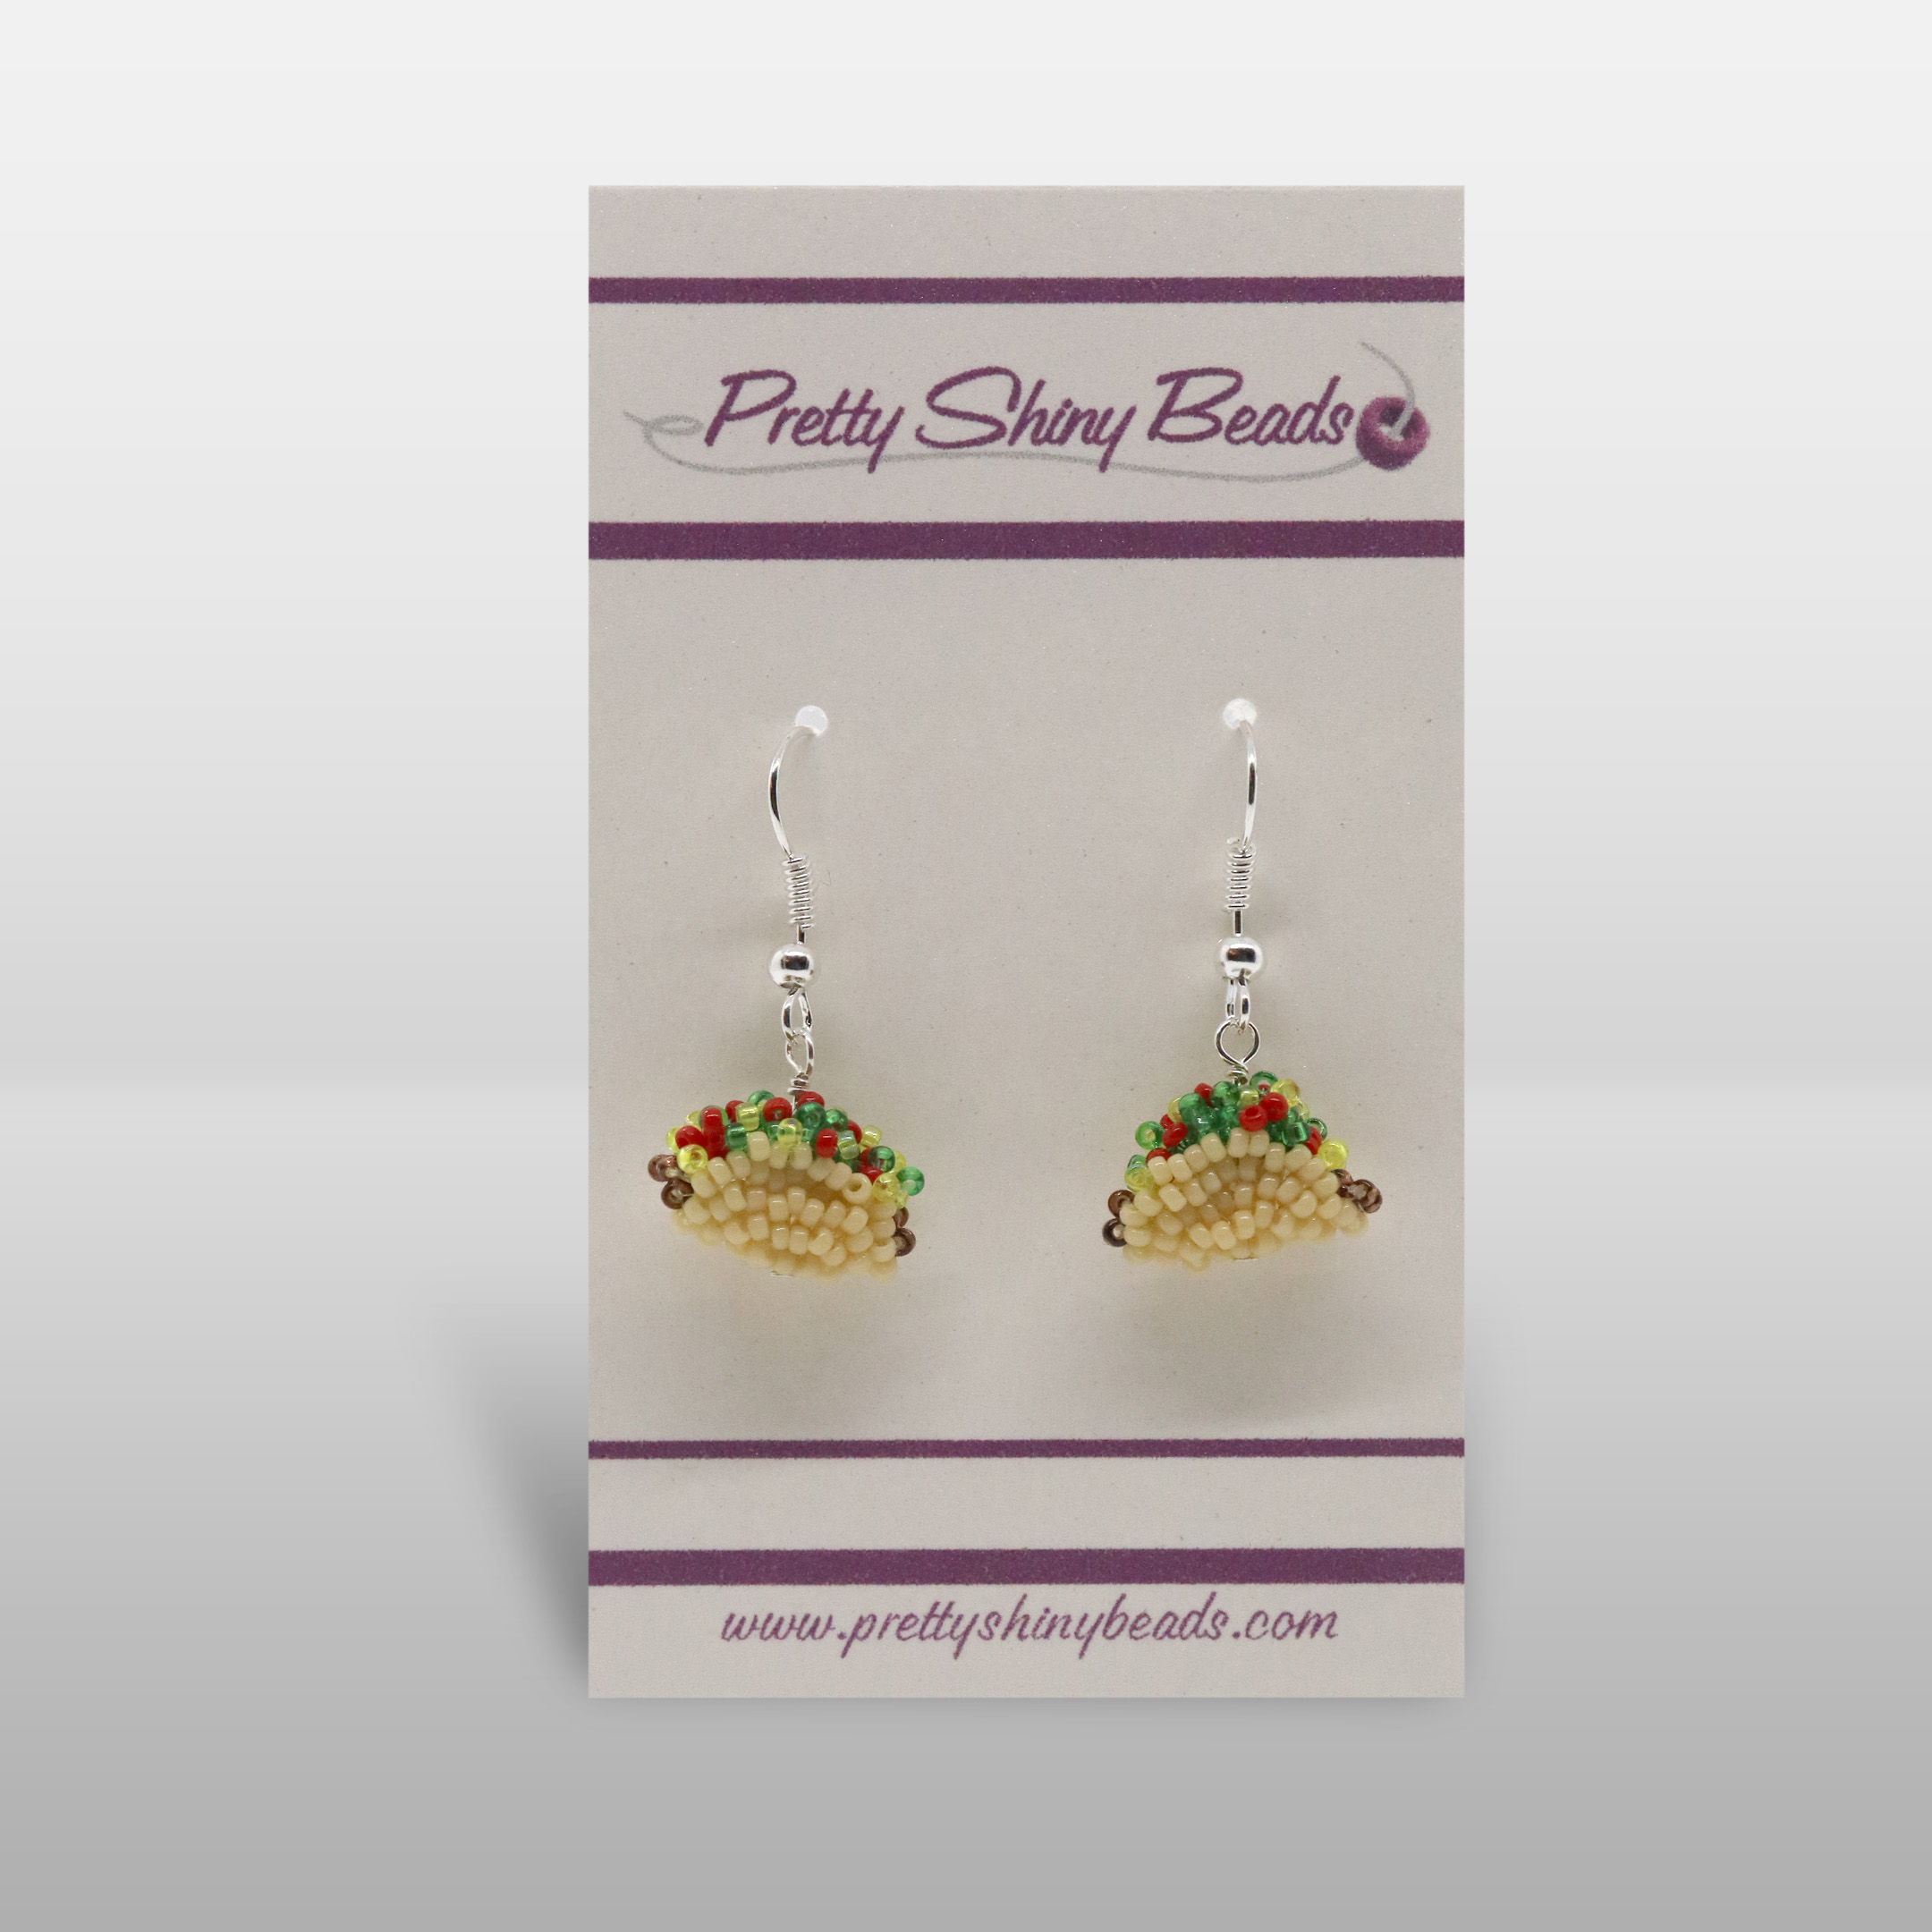 PSB_Earring_Tacos-20240252_package